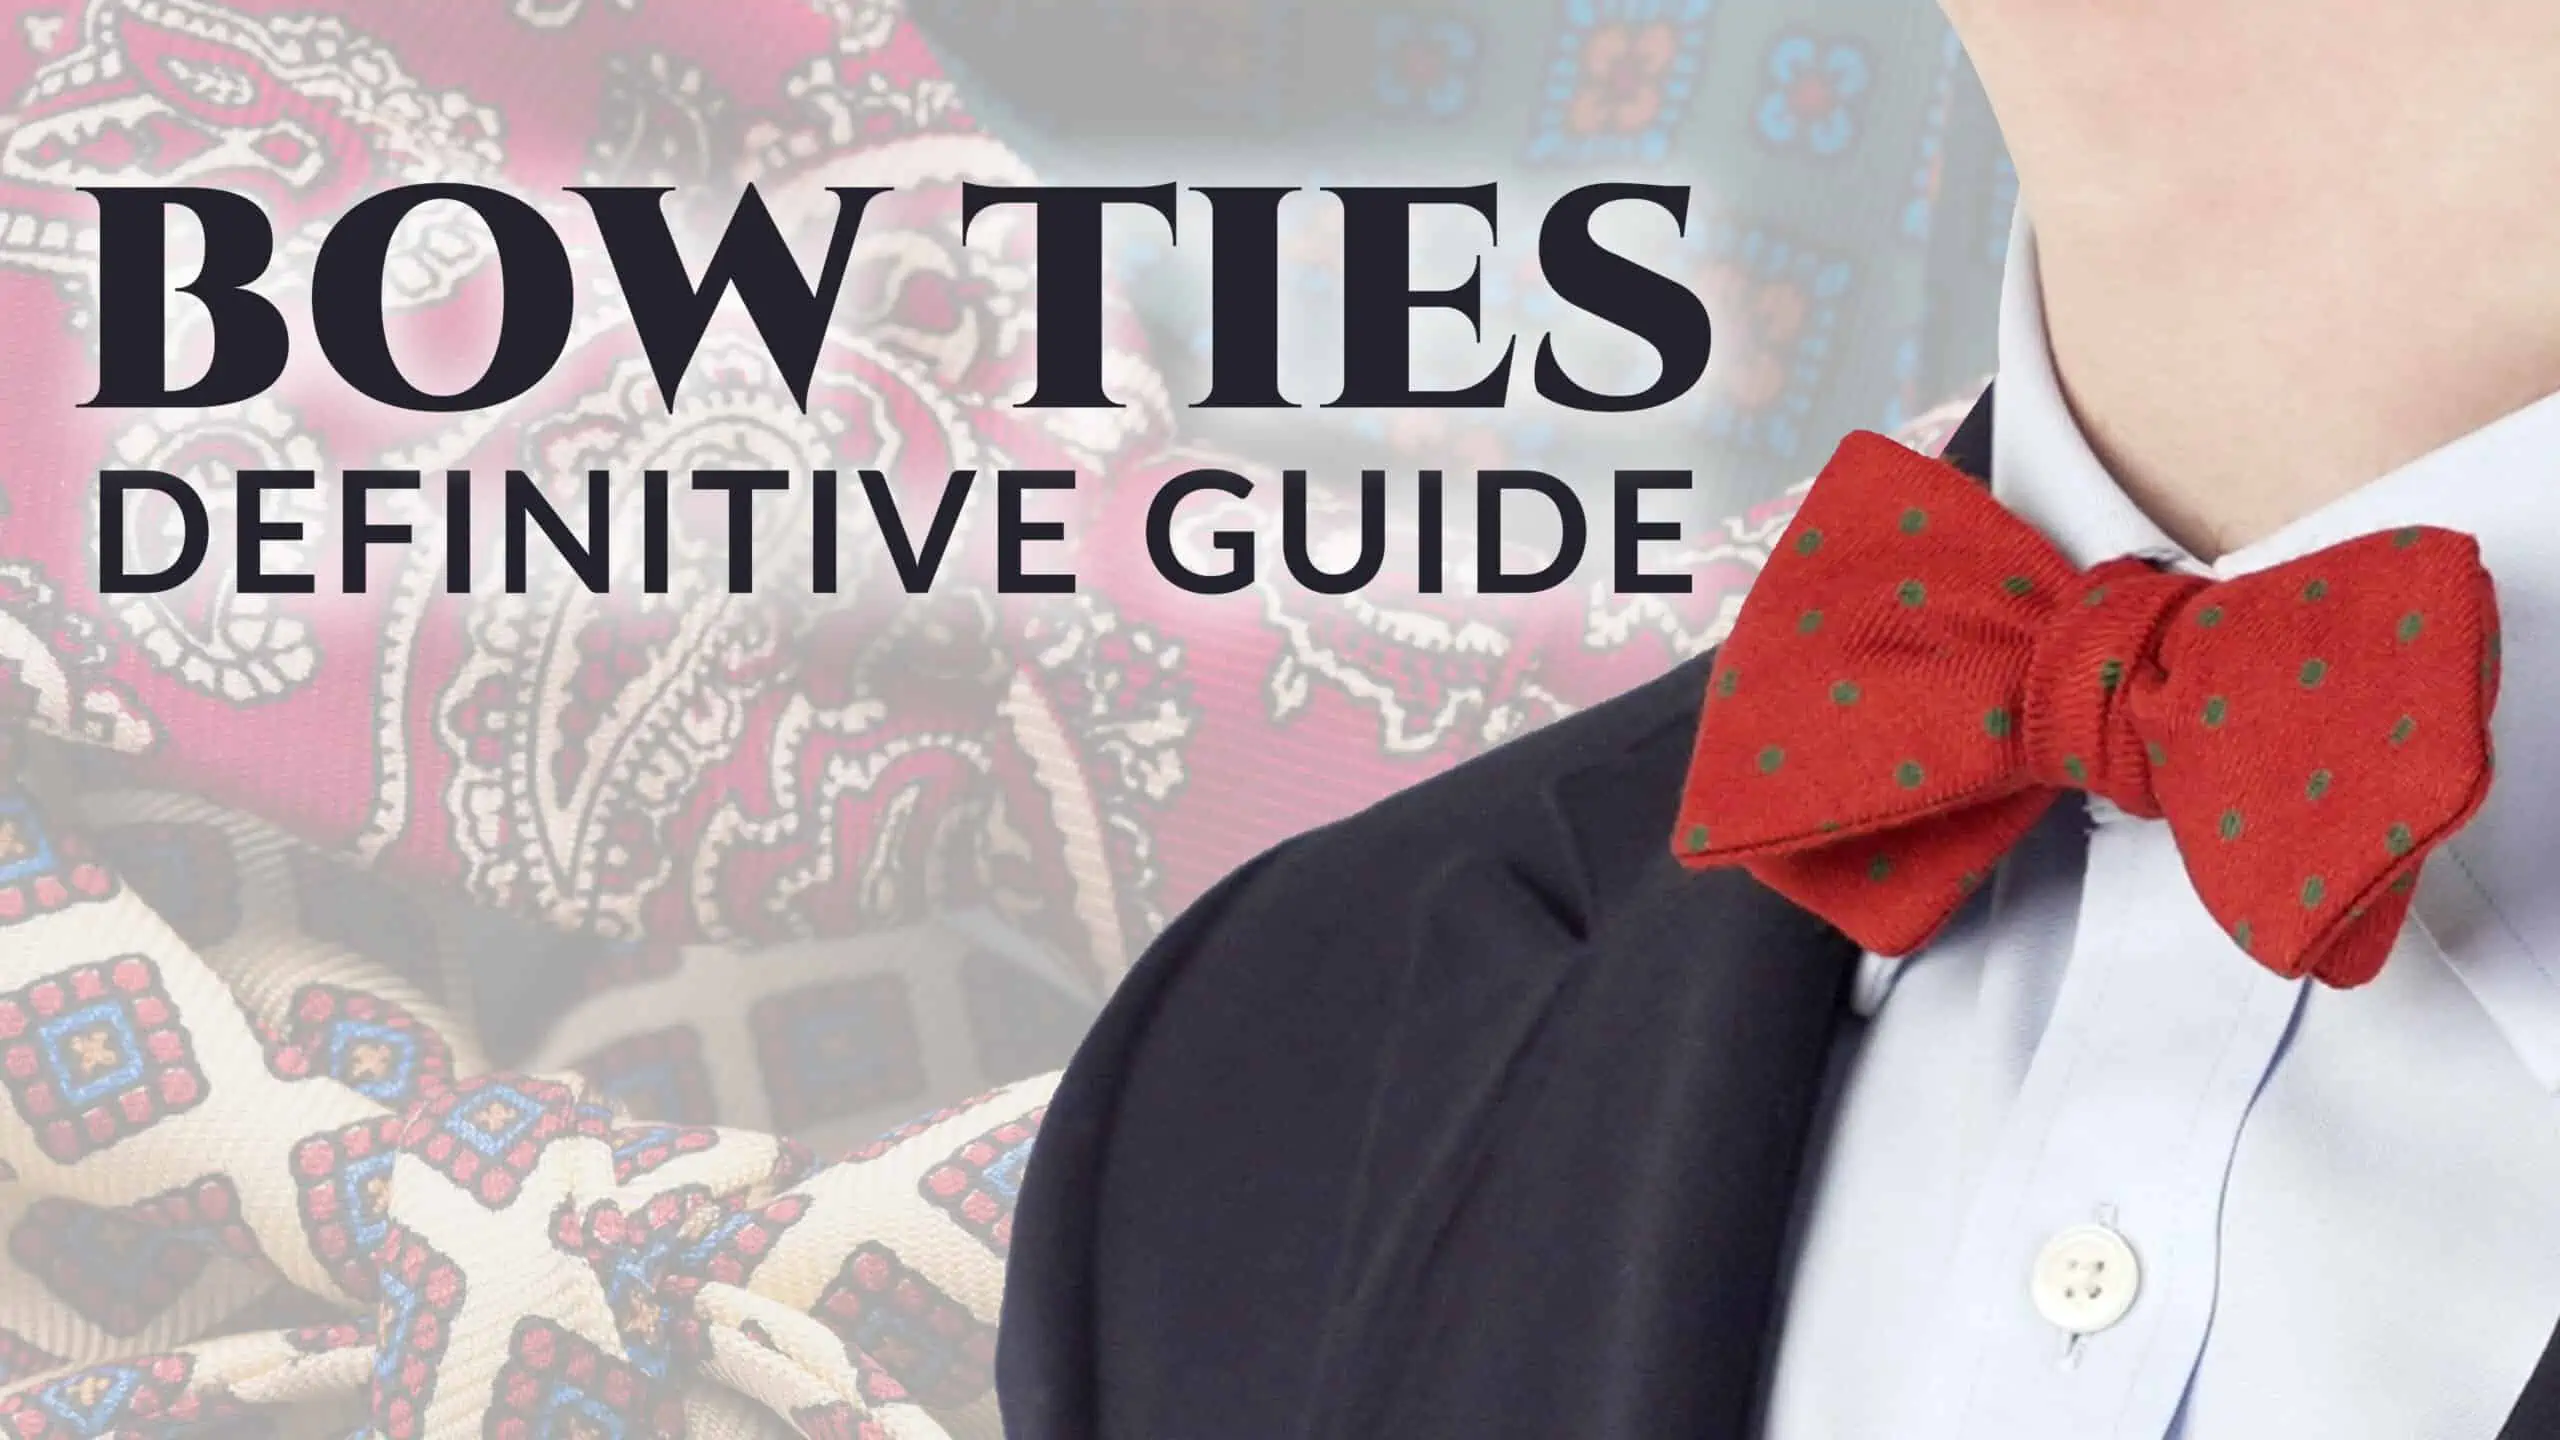 Bow Ties: An Accessory For Tuxedos & Everyday Wear (Guide)